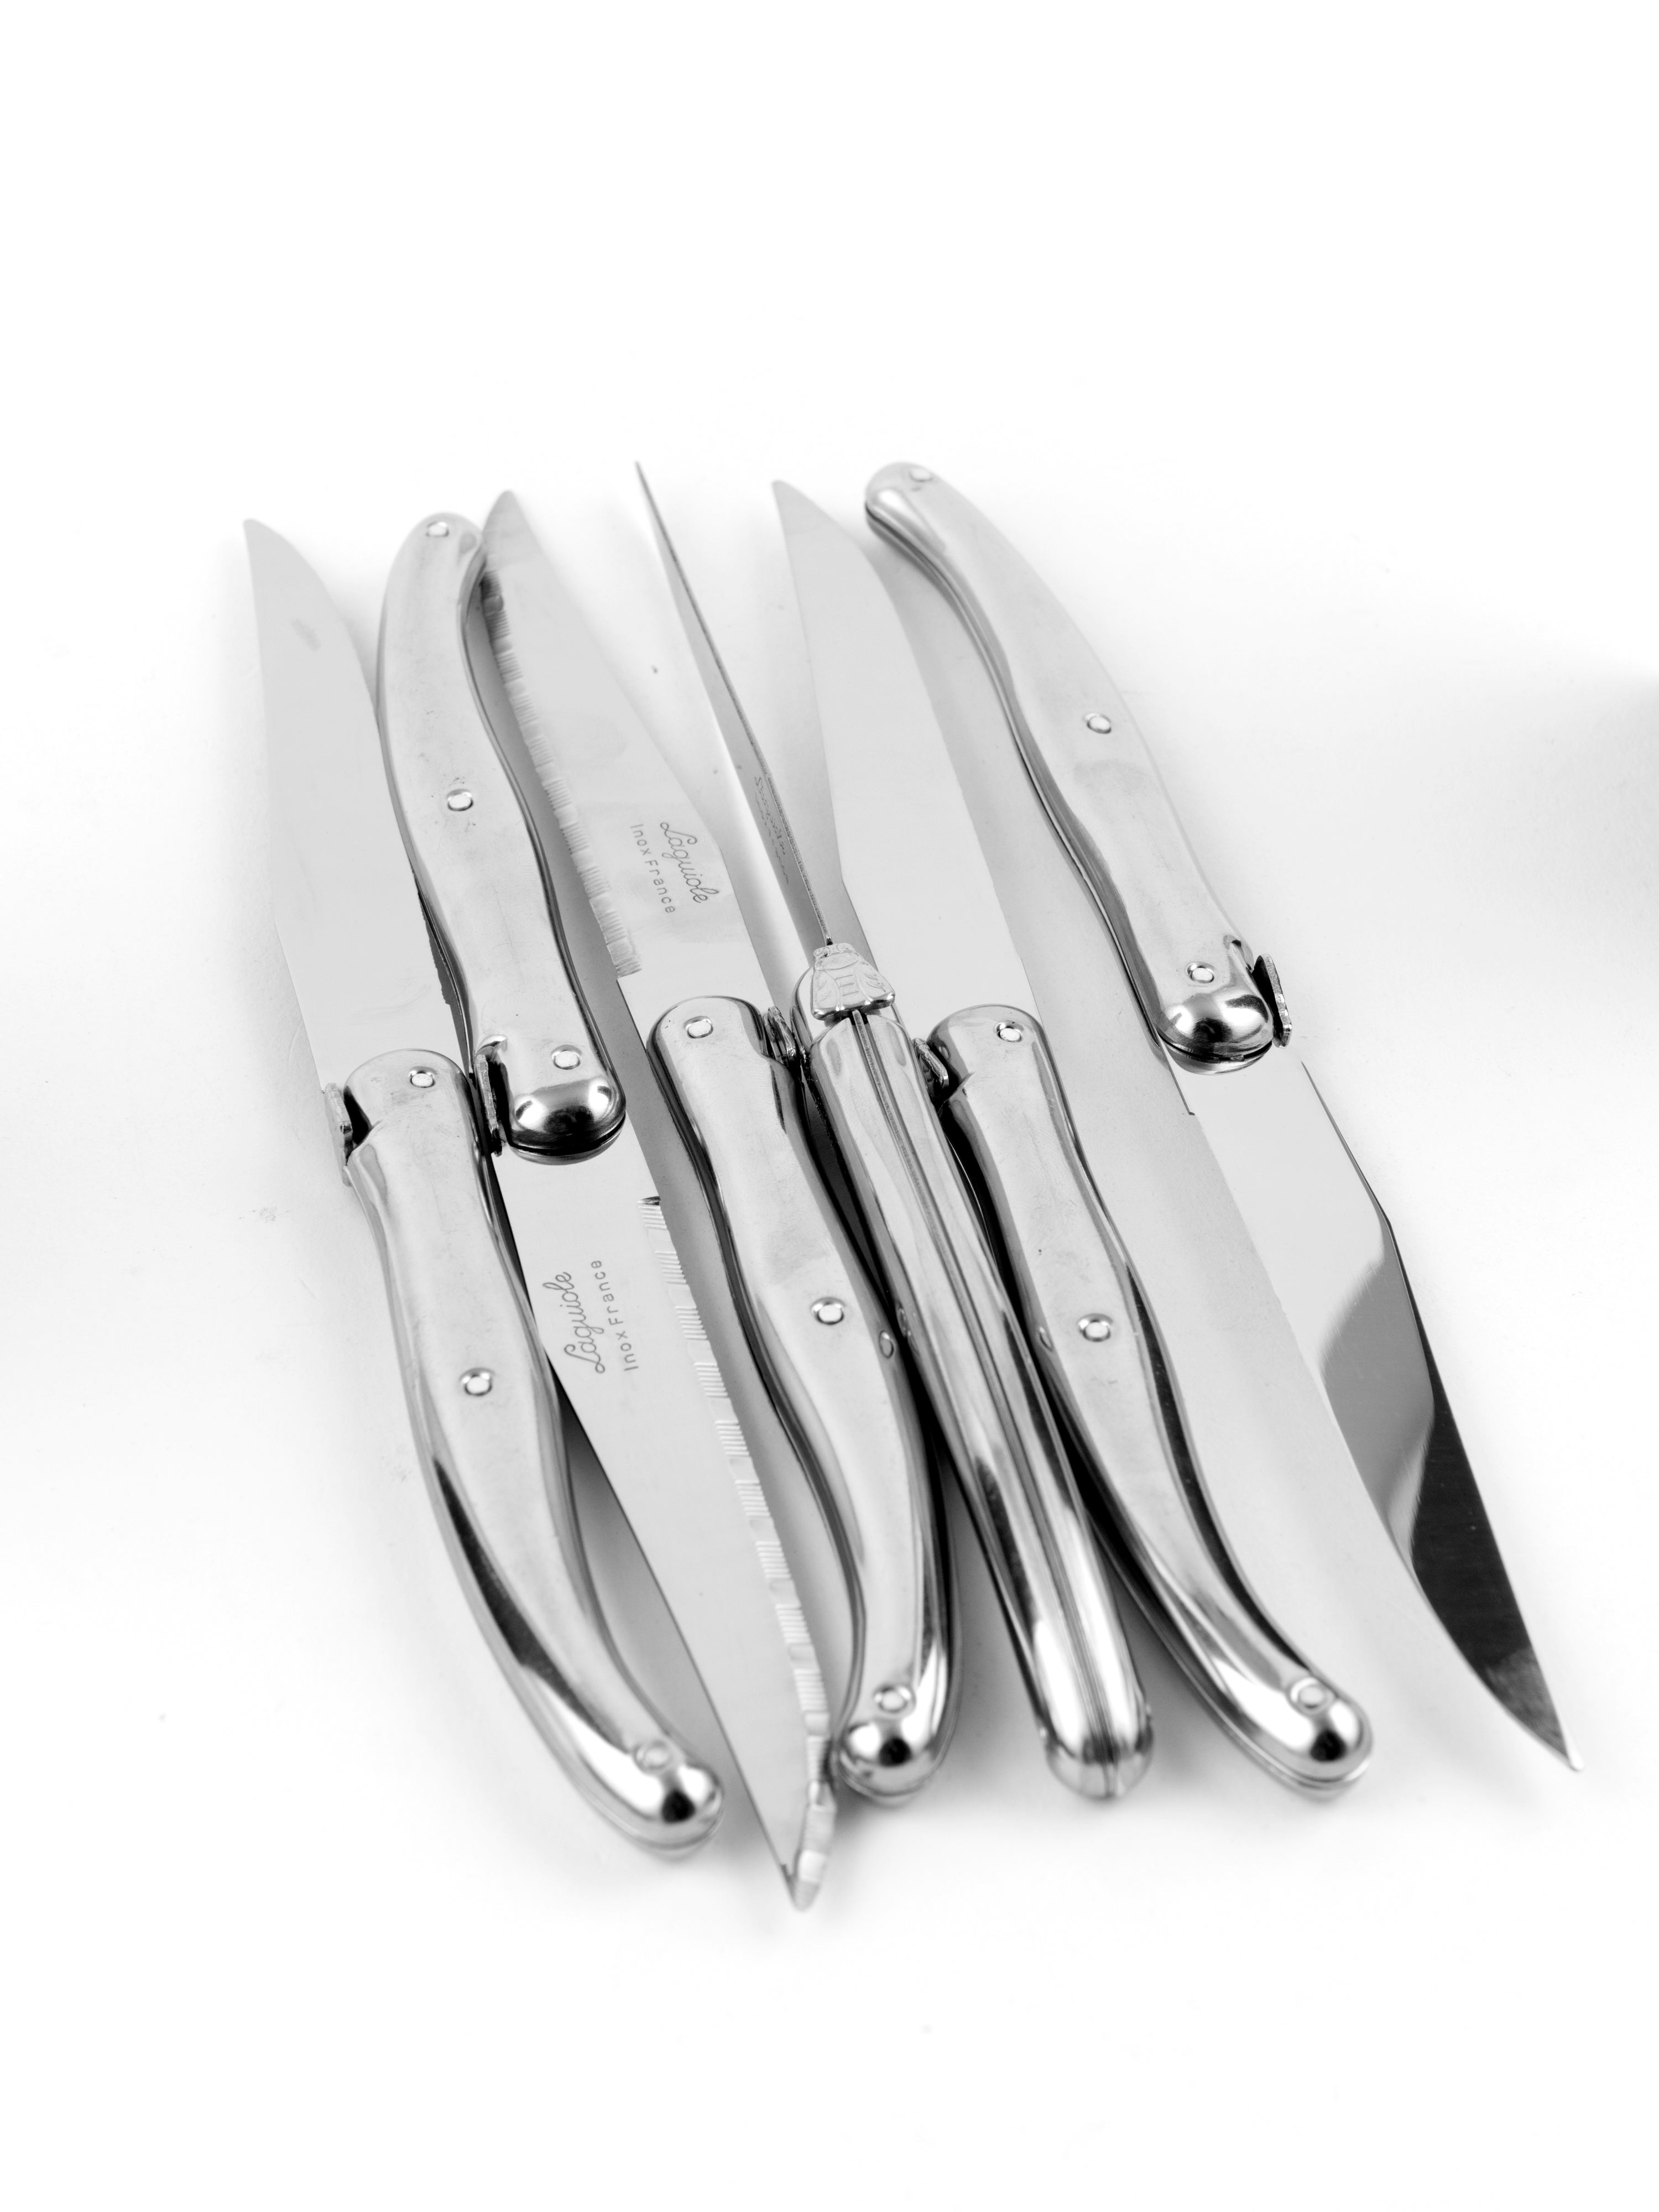 Laguiole Stainless Steel Knives in Wooden Box with Acrylic Lid (Set of 6) Cutlery Laguiole Brand_Laguiole Flatware Sets Kitchen_Dinnerware Kitchen_Kitchenware Laguiole DSC3704_JasonLeCras_LG_433baa8d-d828-4131-a5fa-6040ef5f1392